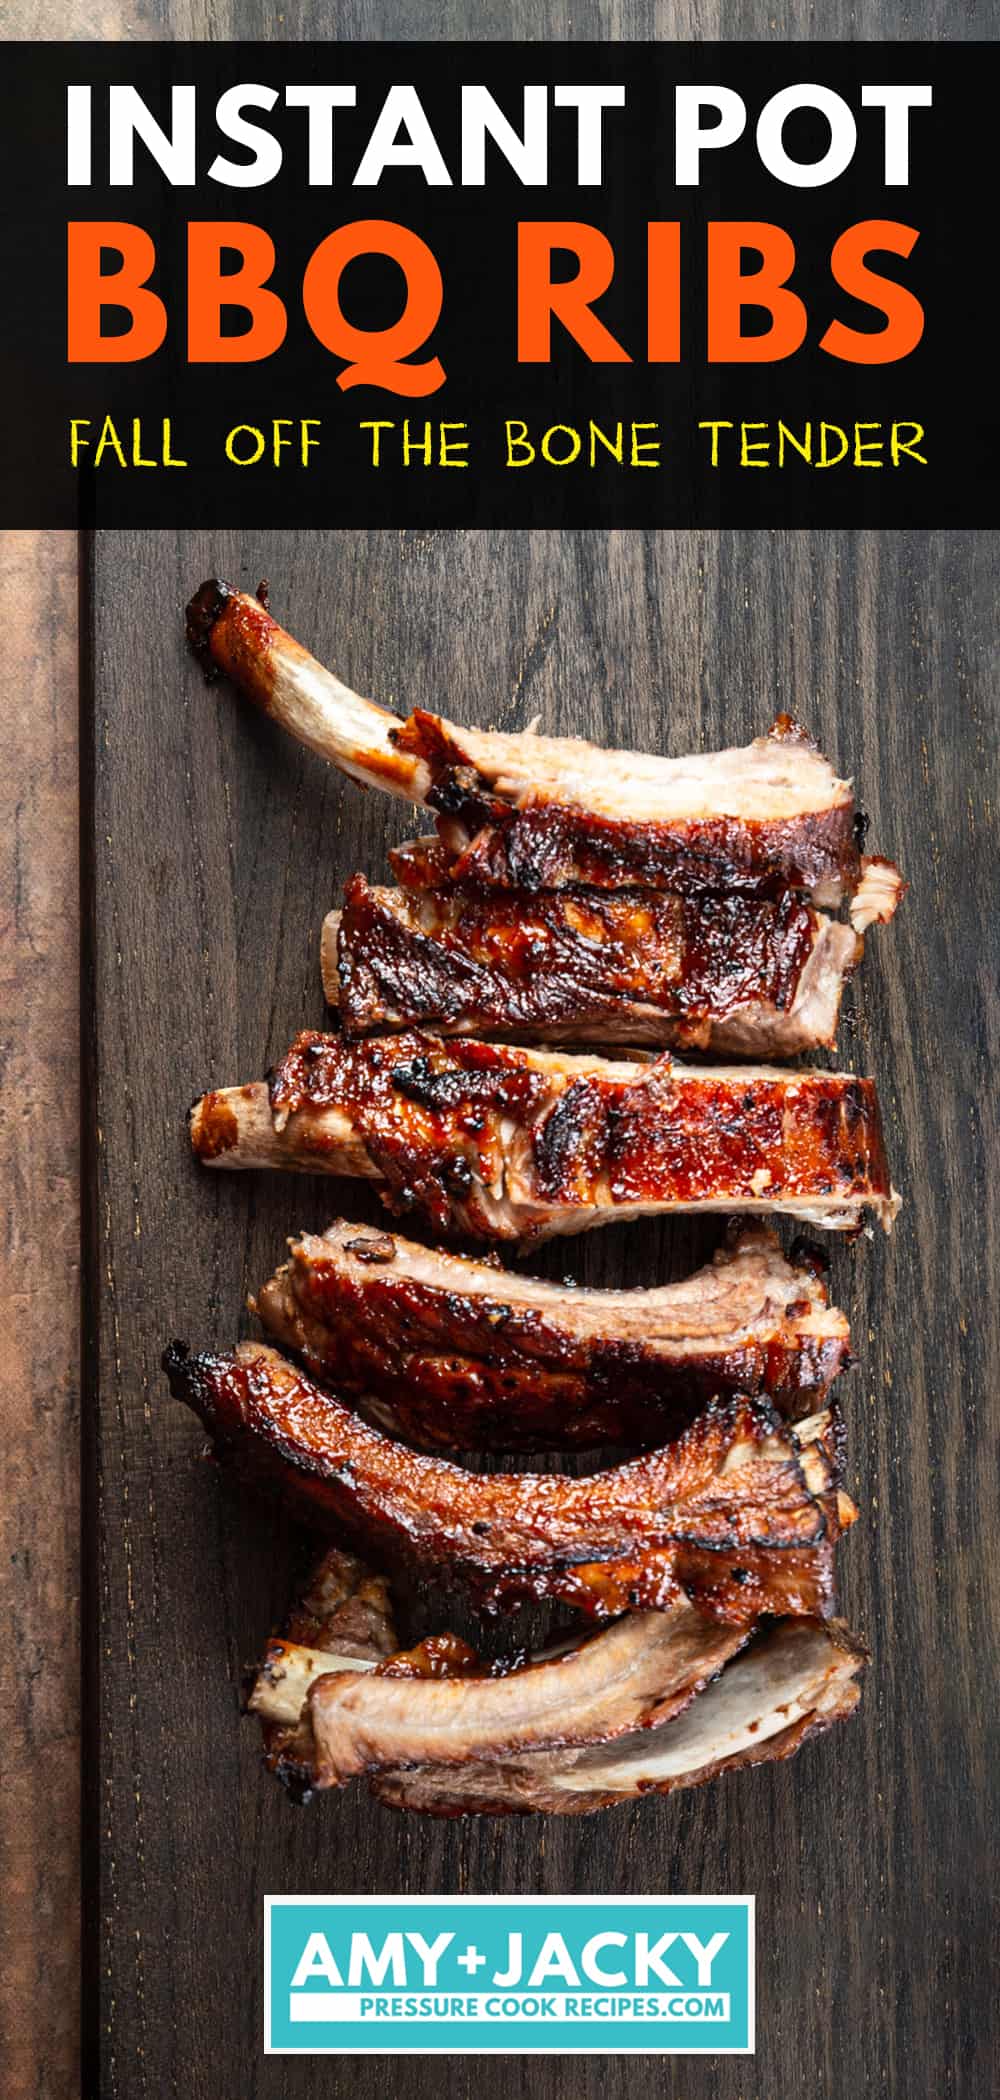 Instant Pot Ribs: Make BBQ Ribs in Instant Pot in 40 minutes! Deliciously tender & juicy BBQ Ribs are great beginner recipe for weeknight dinners or BBQ party.